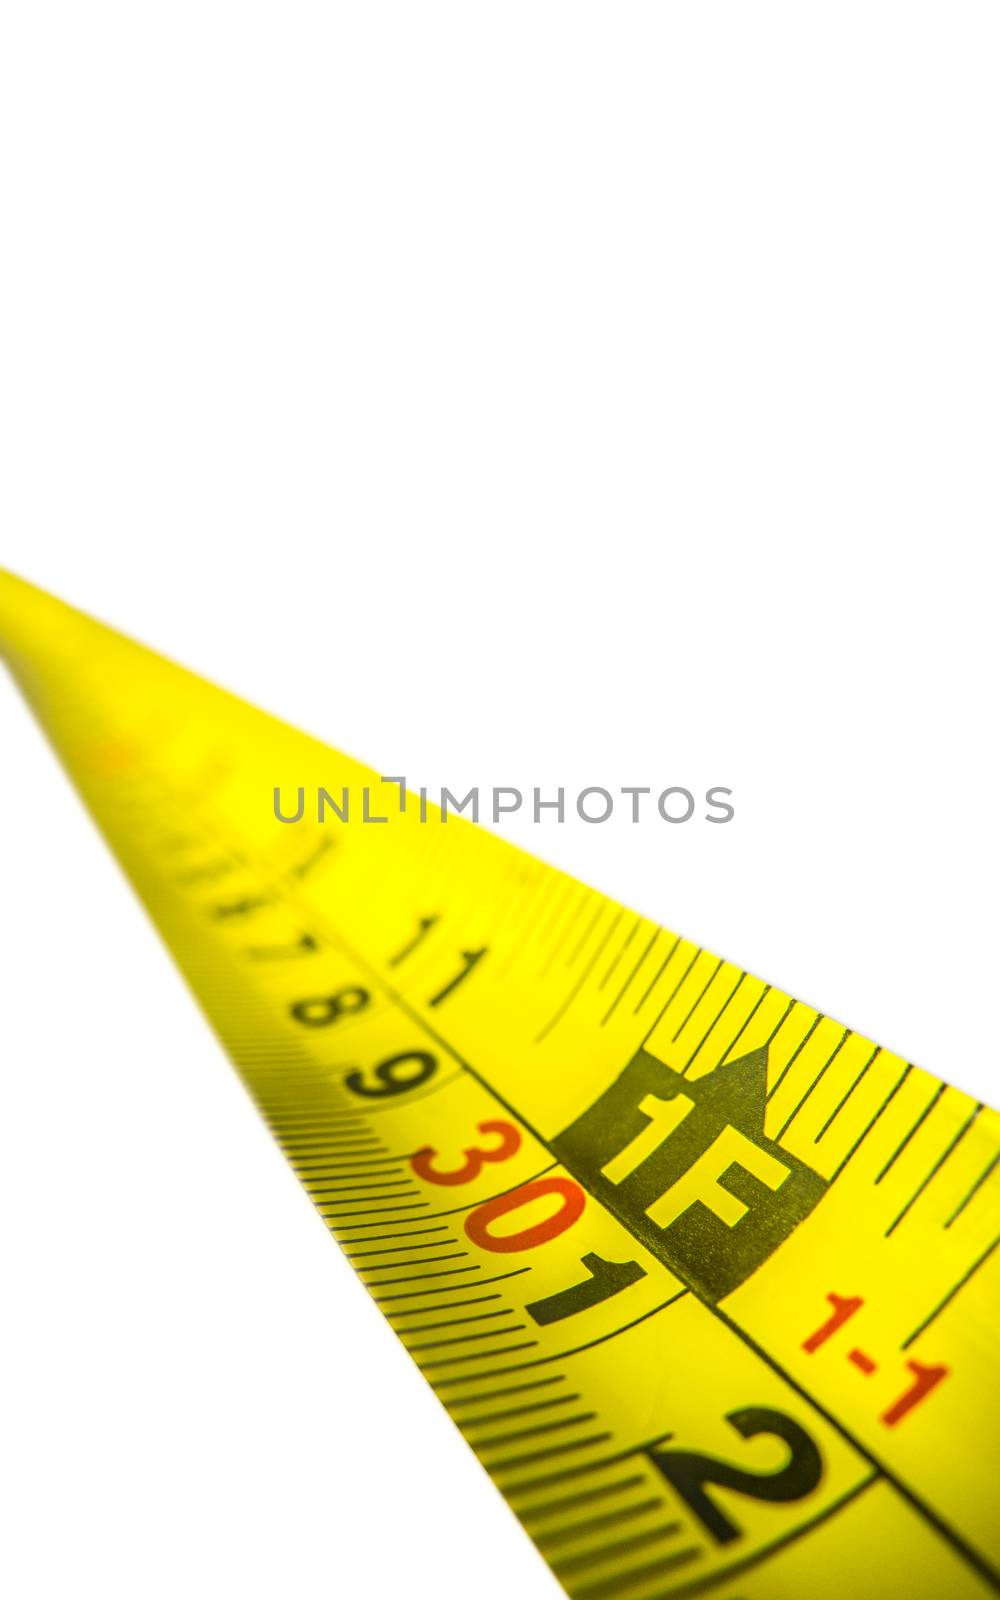 Detail Of A Yellow Tape Measure With Copy Space